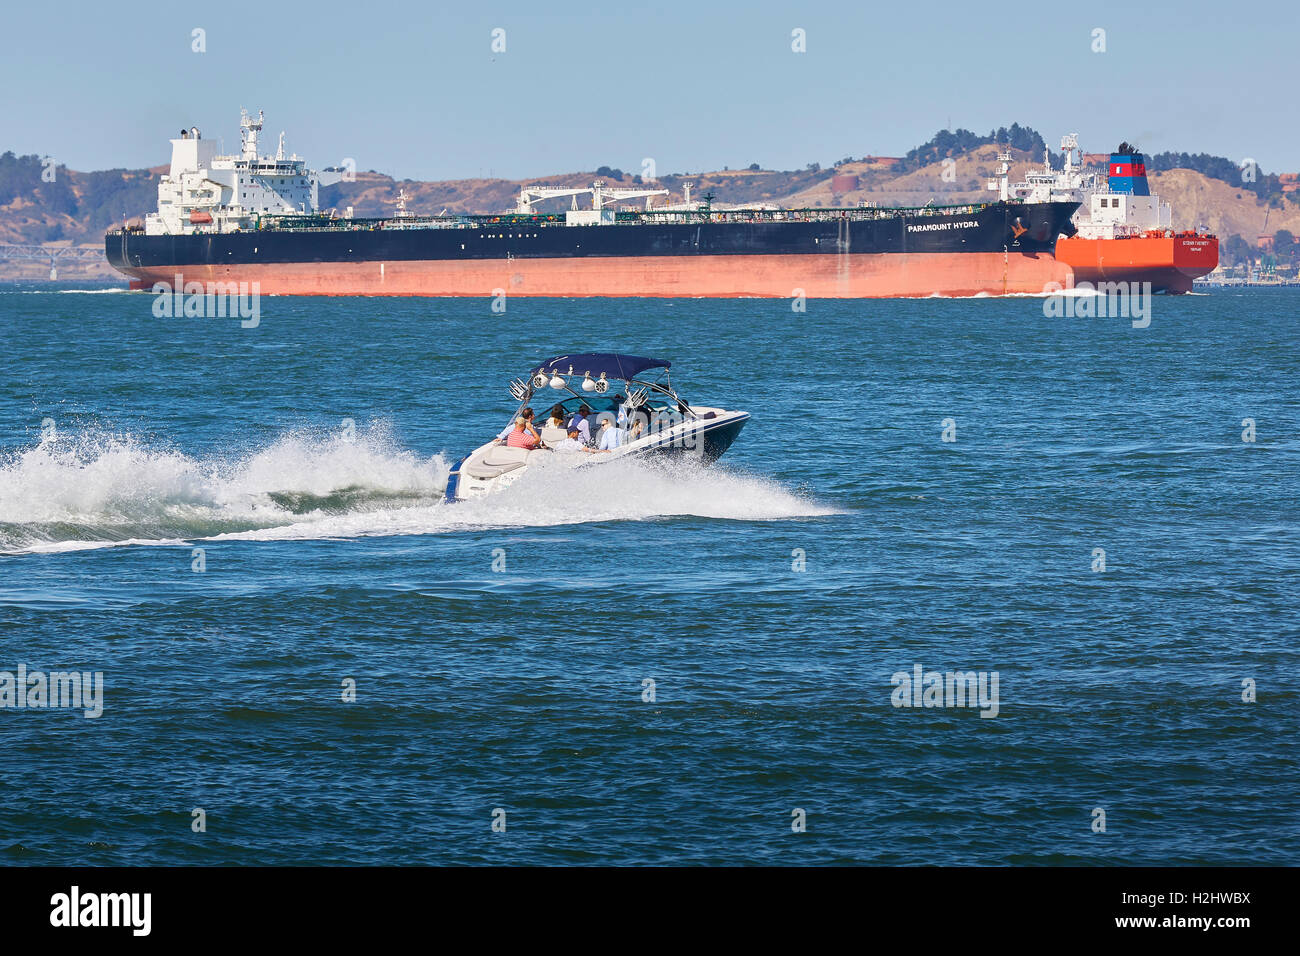 Two Large Tankers Passing In San Francisco Bay, California. Stock Photo